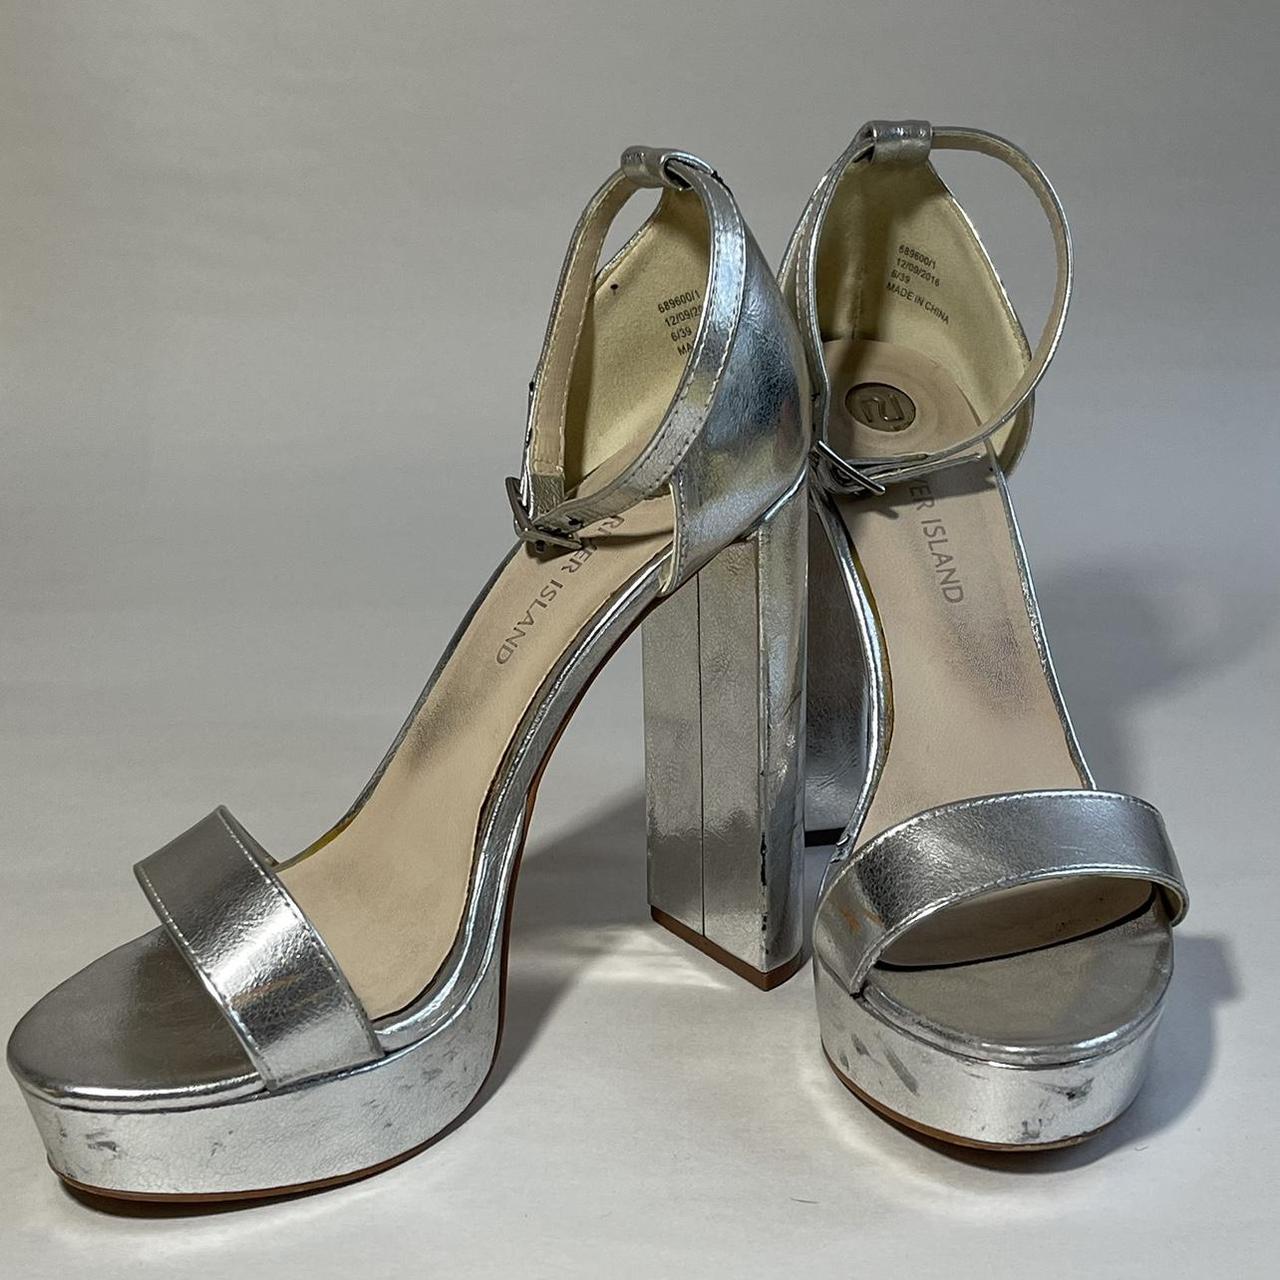 River Island Women's Silver Courts